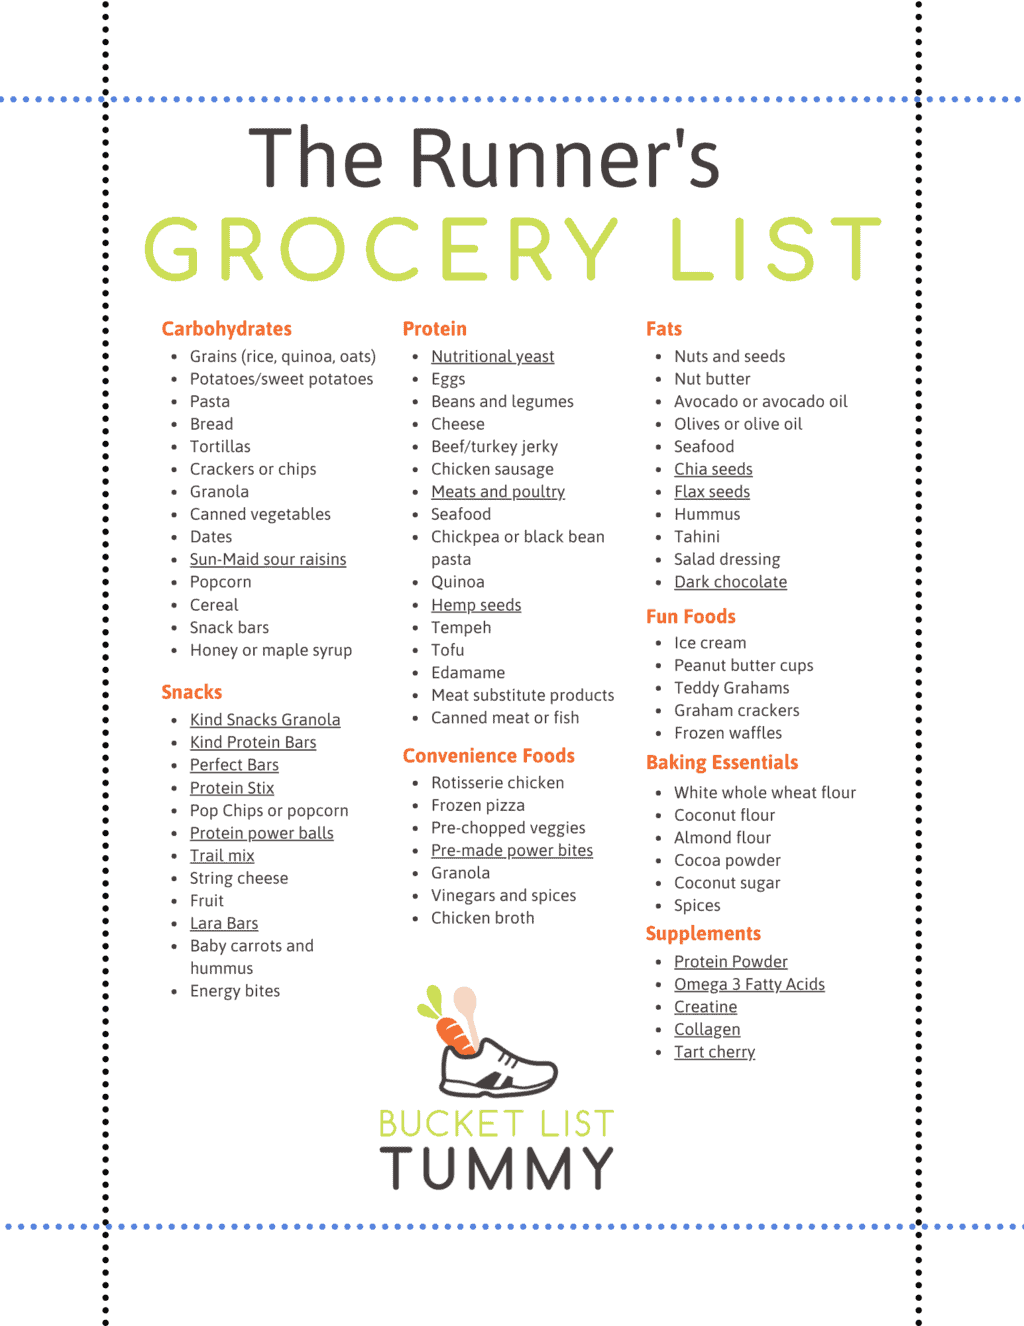 grocery list for runners